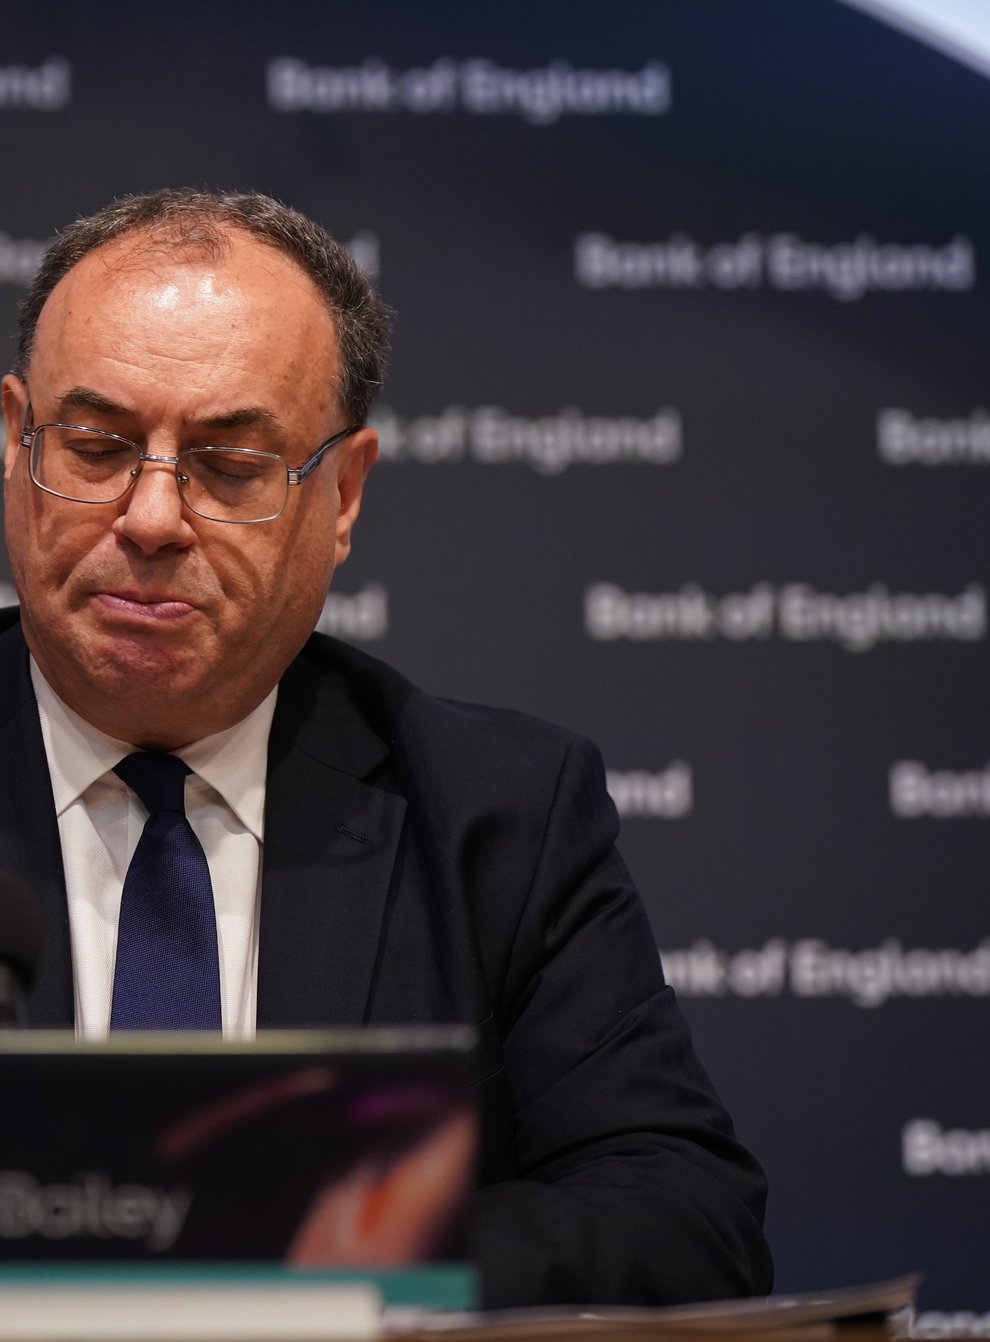 Governor of the Bank of England, Andrew Bailey, during the Bank of England’s financial stability report press conference, at the Bank of England, London (Yui Mok/PA)